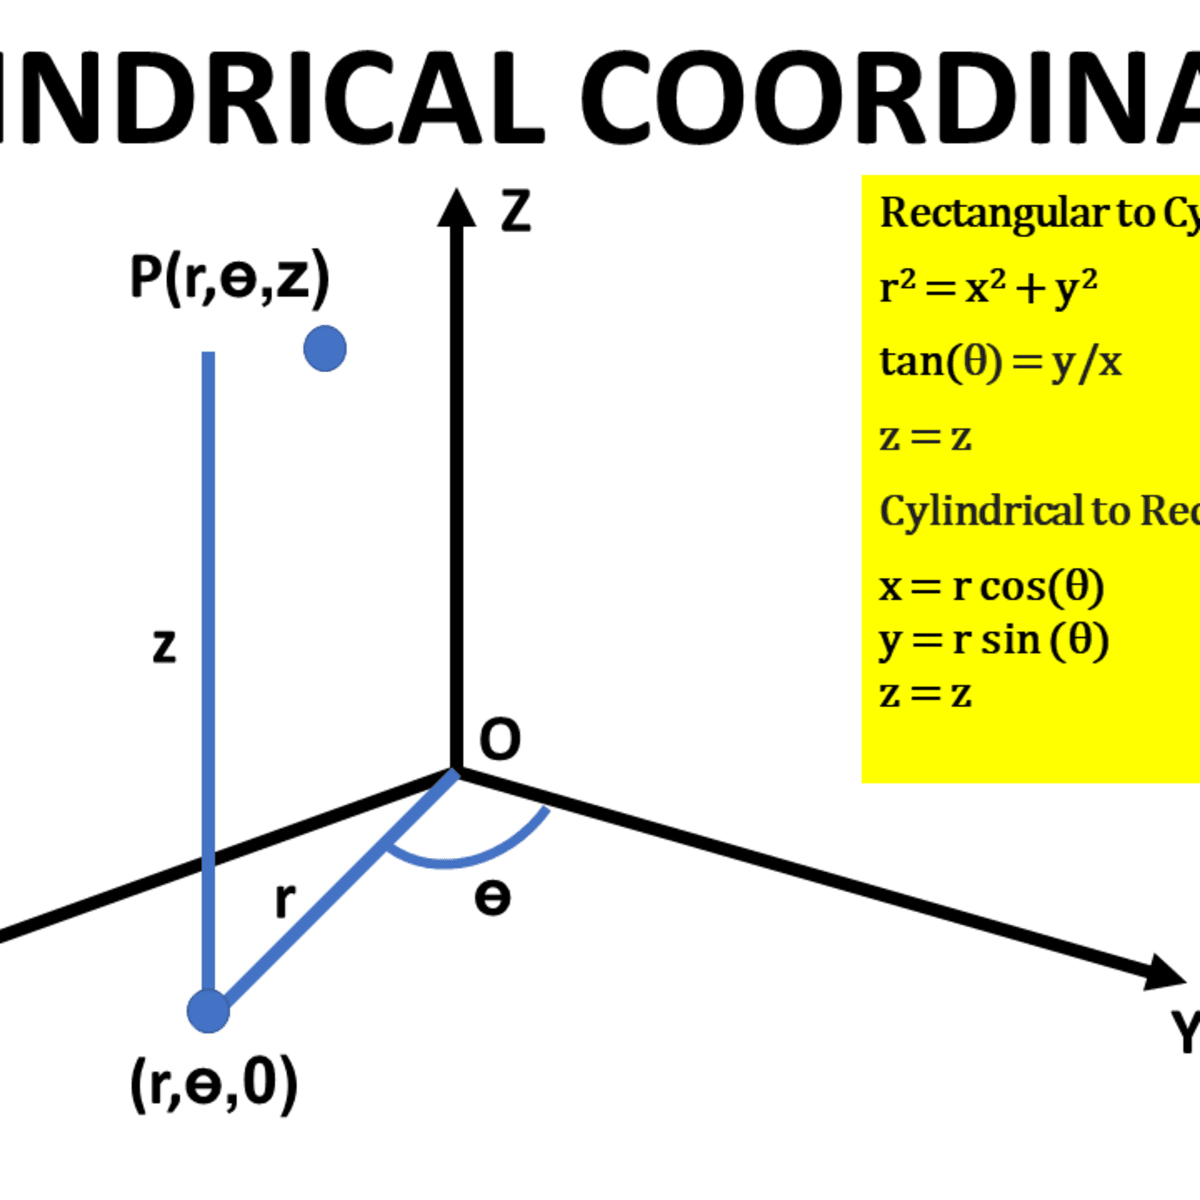 Cylindrical Coordinates Rectangular To Cylindrical Coordinates Conversion And Vice Versa Owlcation